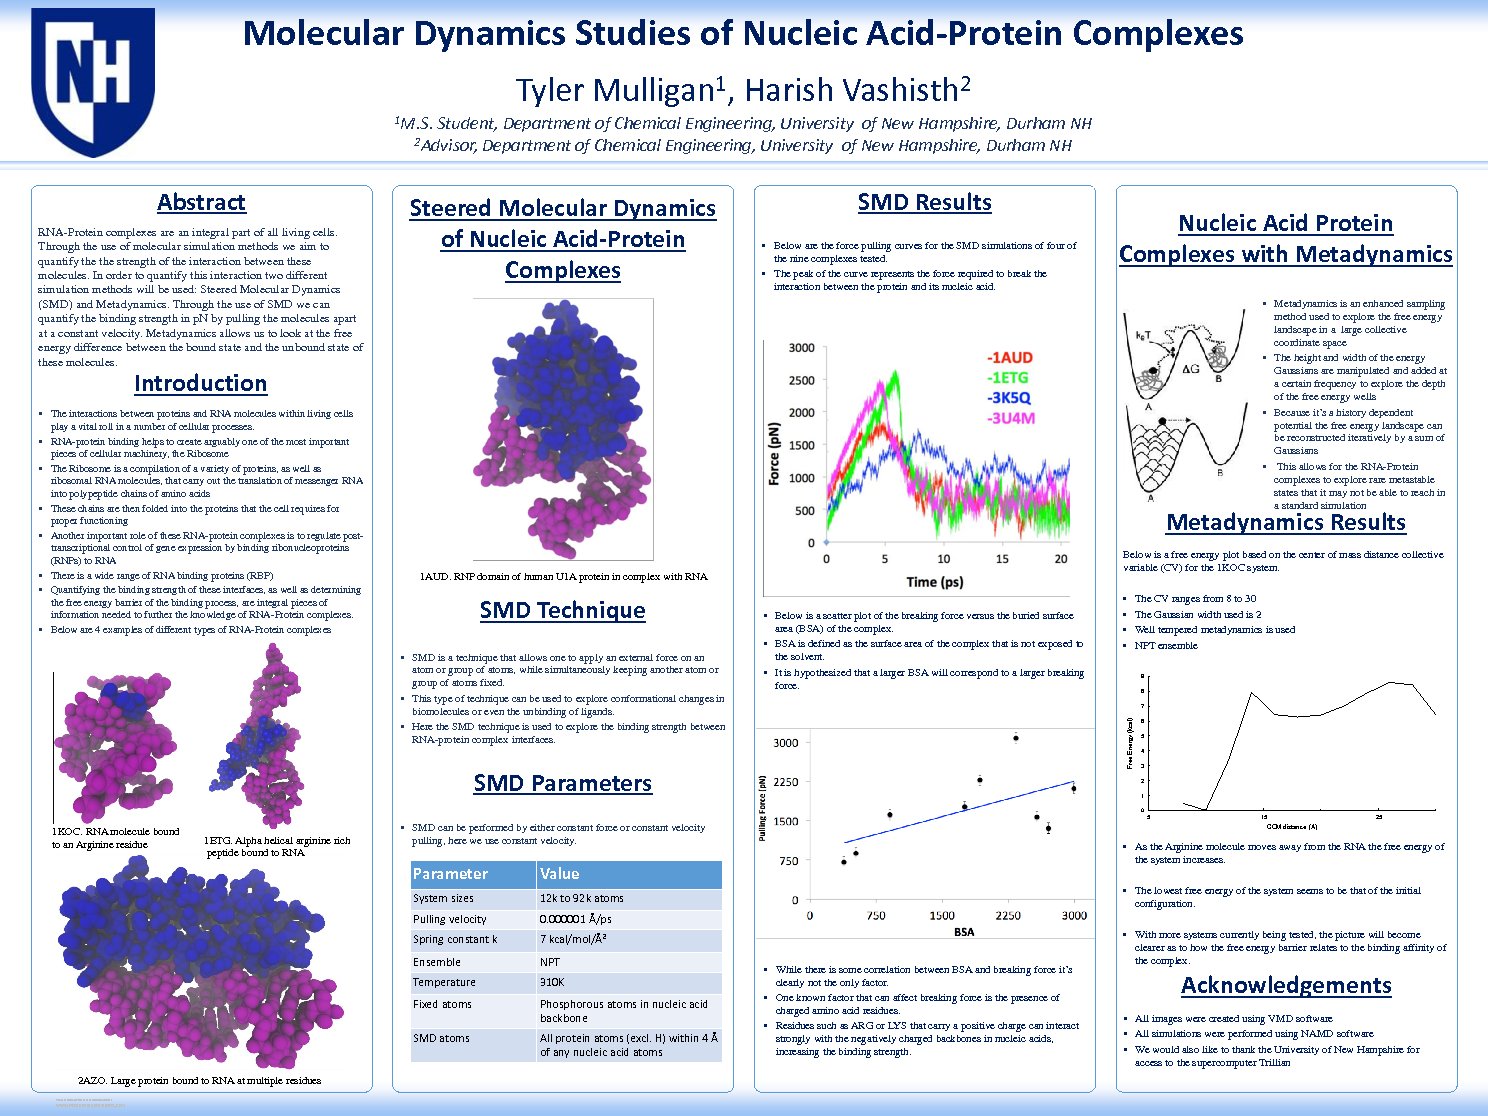 Molecular Dynamics Studies Of Nucleic Acid-Protein Complexes by tjr65